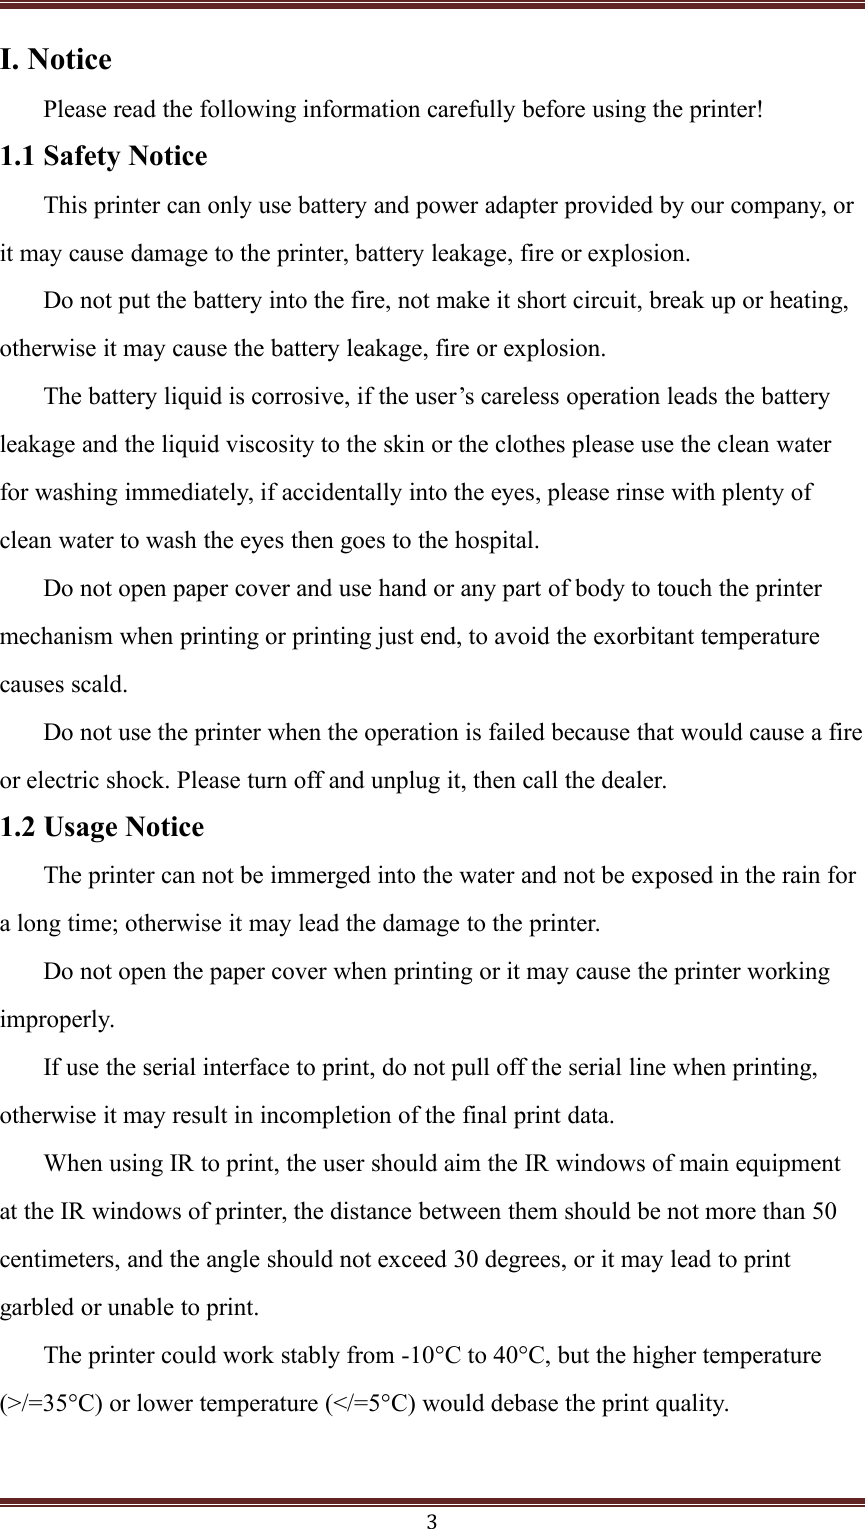 3I. NoticePlease read the following information carefully before using the printer!1.1 Safety NoticeThis printer can only use battery and power adapter provided by our company, orit may cause damage to the printer, battery leakage, fire or explosion.Do not put the battery into the fire, not make it short circuit, break up or heating,otherwise it may cause the battery leakage, fire or explosion.The battery liquid is corrosive, if the user’s careless operation leads the batteryleakage and the liquid viscosity to the skin or the clothes please use the clean waterfor washing immediately, if accidentally into the eyes, please rinse with plenty ofclean water to wash the eyes then goes to the hospital.Do not open paper cover and use hand or any part of body to touch the printermechanism when printing or printing just end, to avoid the exorbitant temperaturecauses scald.Do not use the printer when the operation is failed because that would cause a fireor electric shock. Please turn off and unplug it, then call the dealer.1.2 Usage NoticeThe printer can not be immerged into the water and not be exposed in the rain fora long time; otherwise it may lead the damage to the printer.Do not open the paper cover when printing or it may cause the printer workingimproperly.If use the serial interface to print, do not pull off the serial line when printing,otherwise it may result in incompletion of the final print data.When using IR to print, the user should aim the IR windows of main equipmentat the IR windows of printer, the distance between them should be not more than 50centimeters, and the angle should not exceed 30 degrees, or it may lead to printgarbled or unable to print.The printer could work stably from -10°C to 40°C, but the higher temperature(&gt;/=45°C) or lower temperature (&lt;/=5°C) would debase the print quality.3